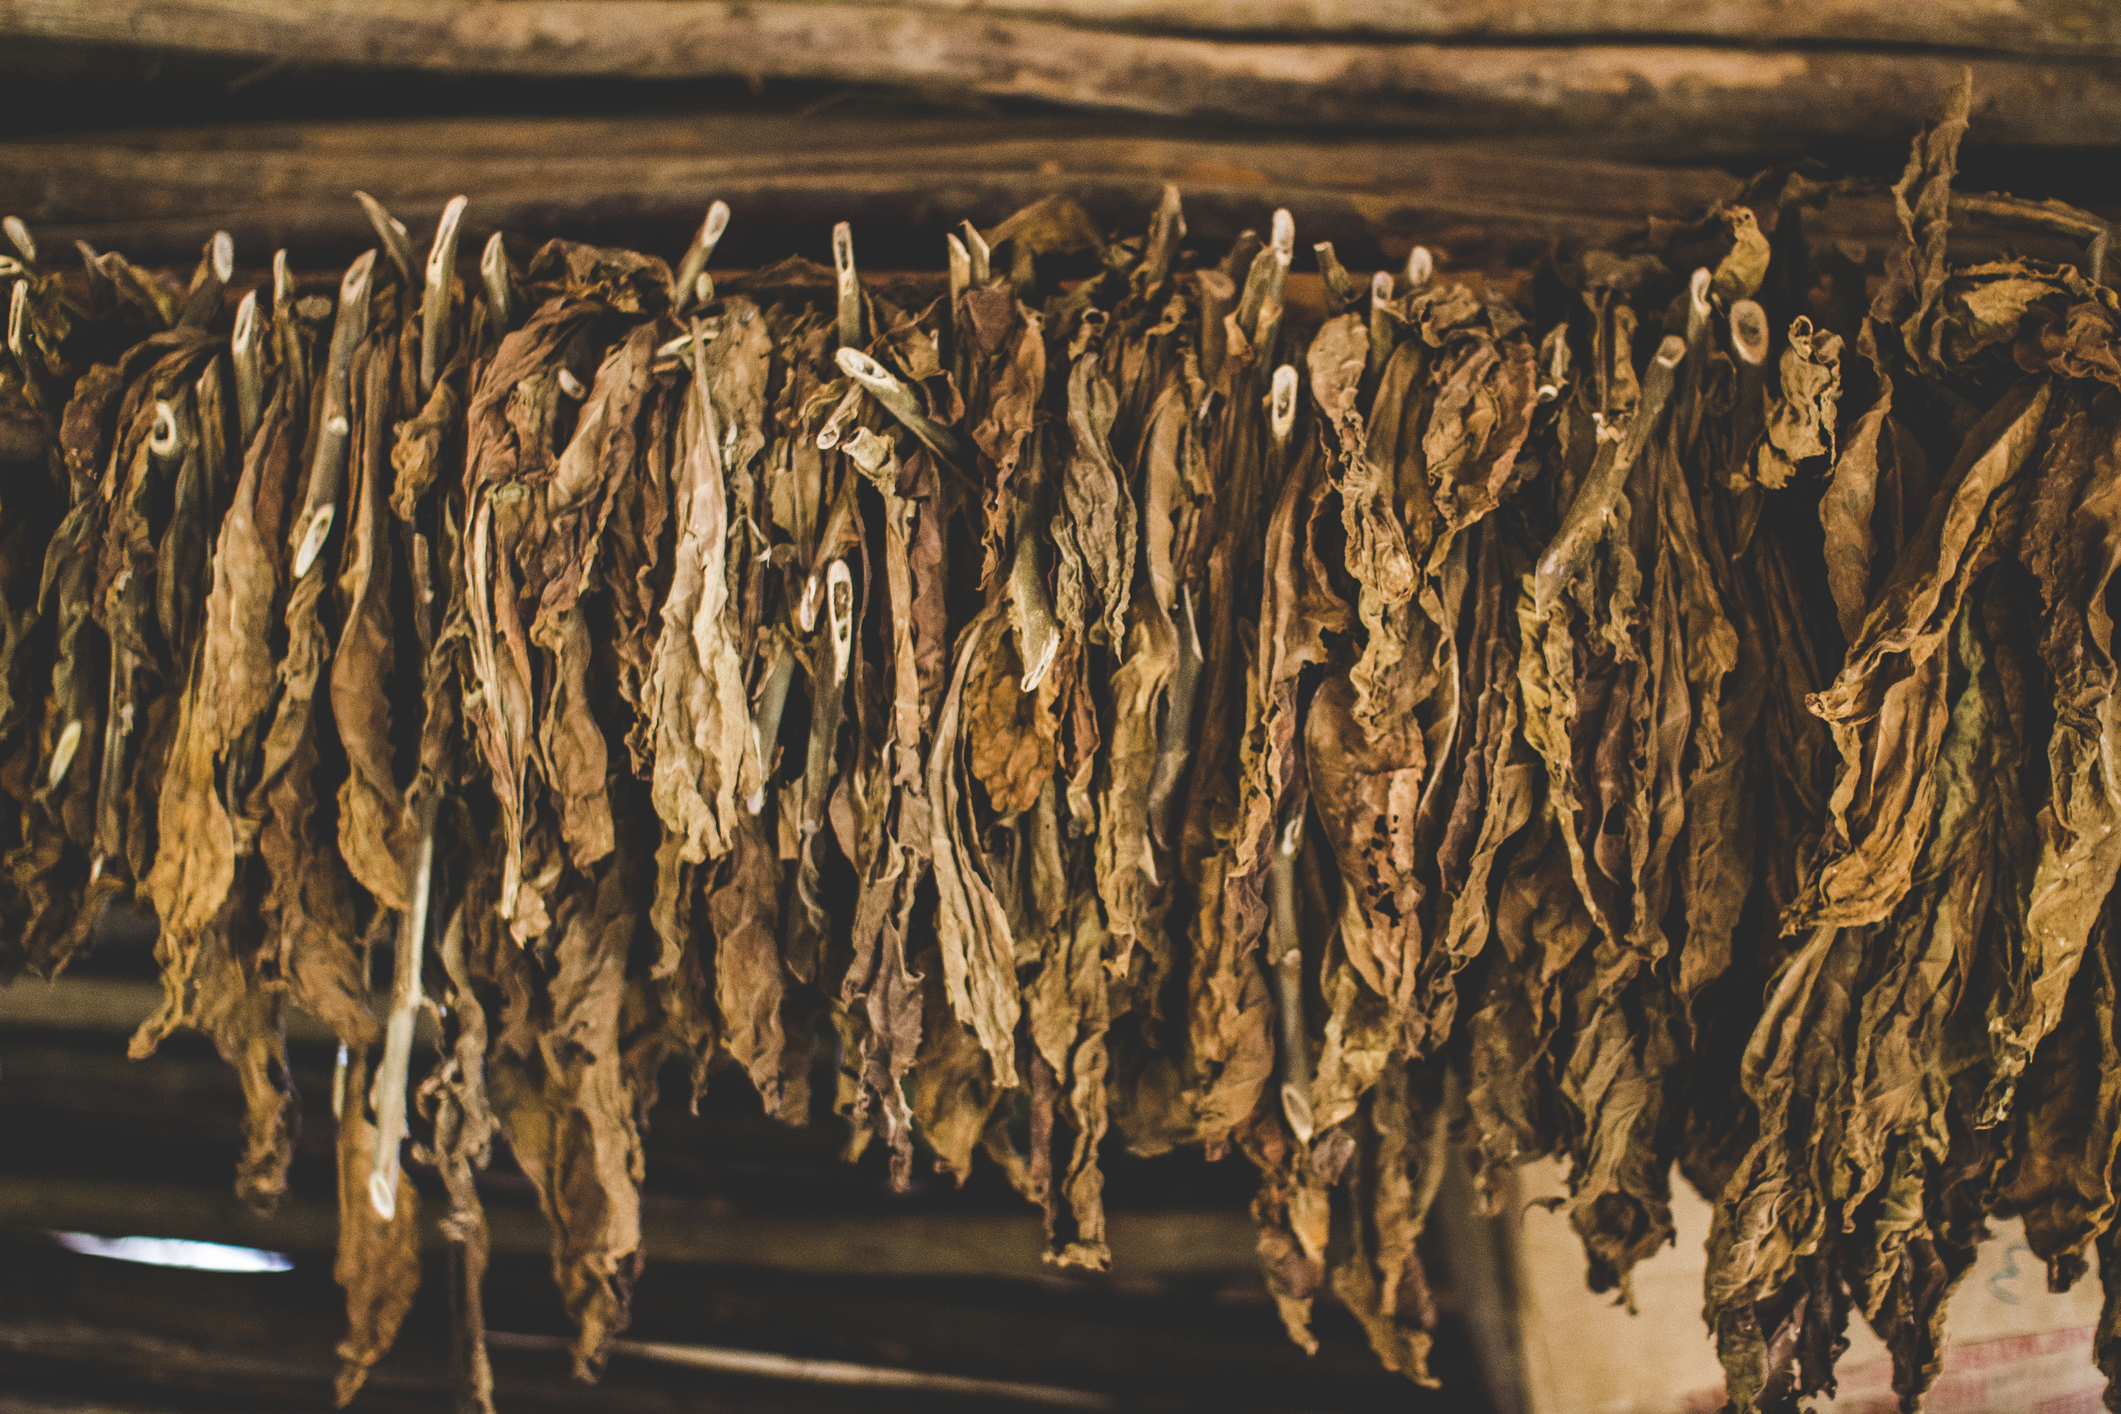 Drying Tobacco Leaves